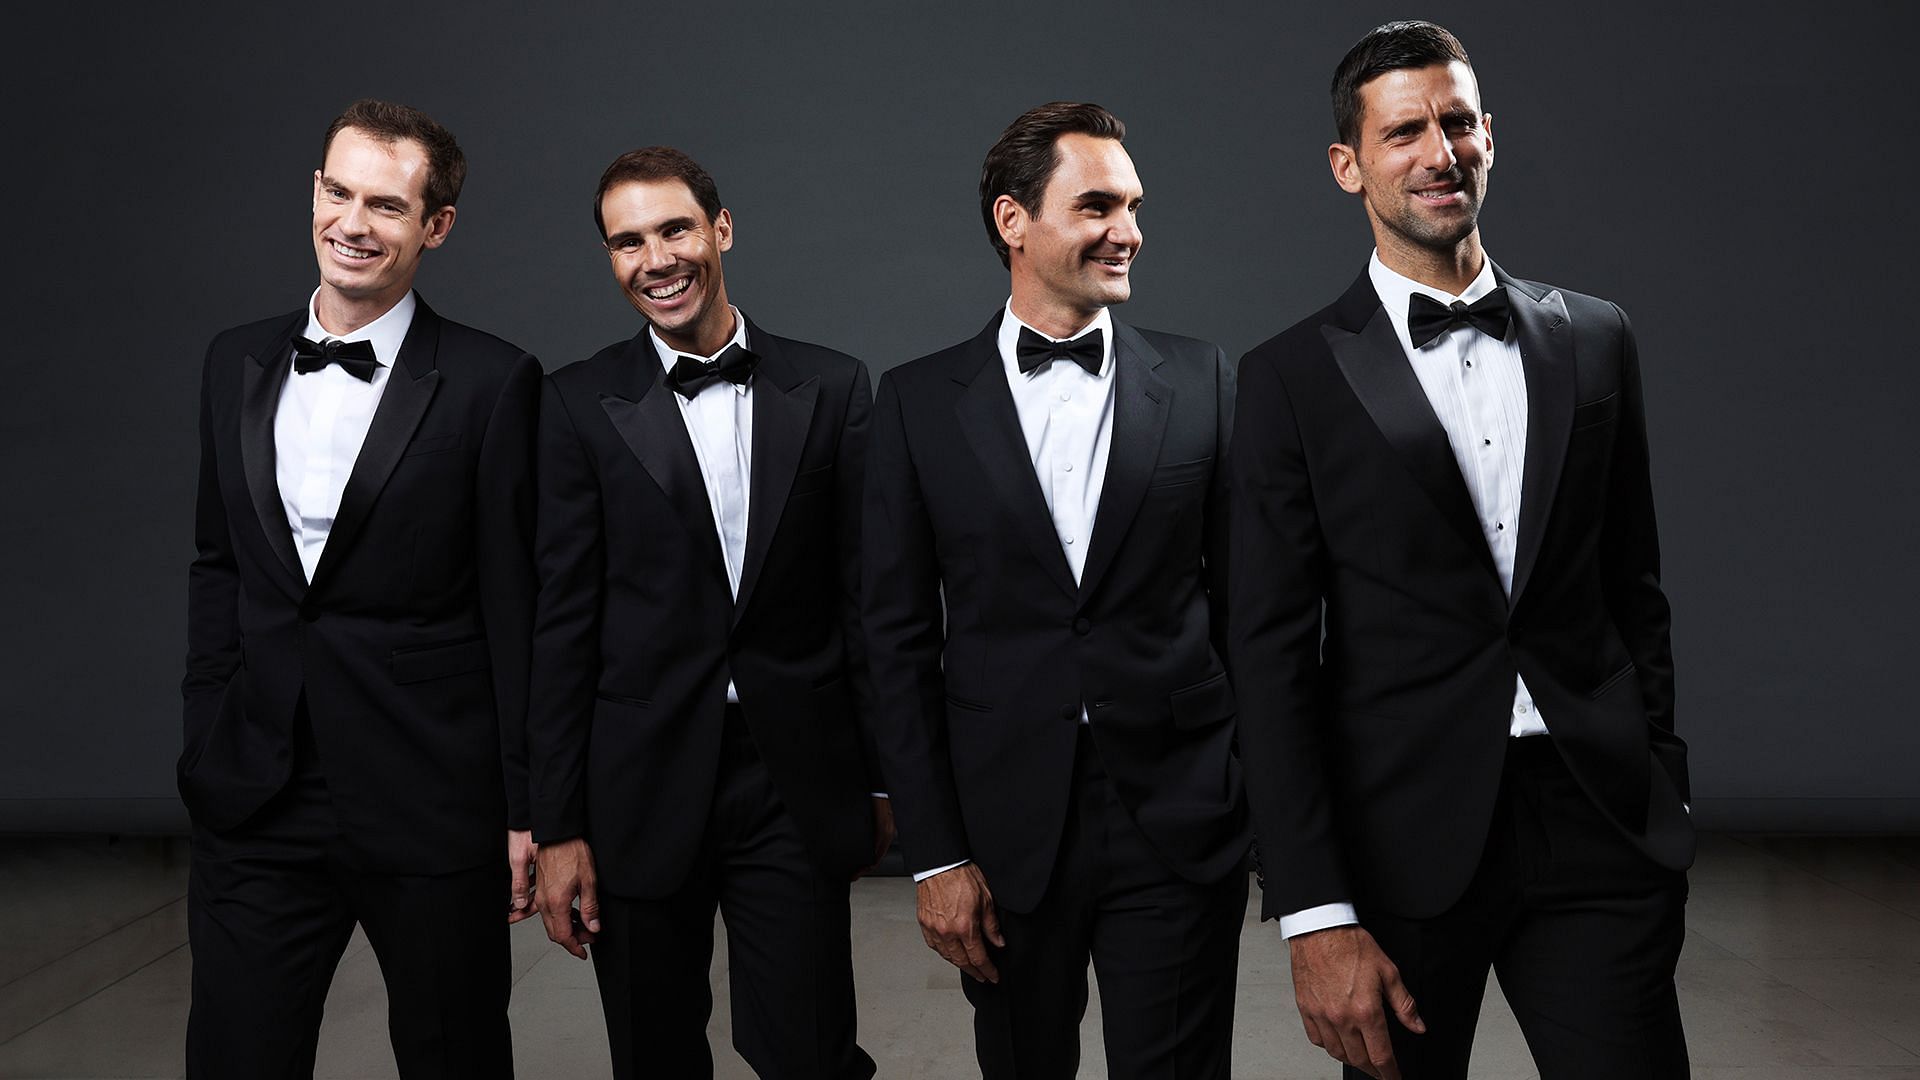 Murray, Nadal, Federer and Djokovic have won a combined 67 Grand Slam titles. 